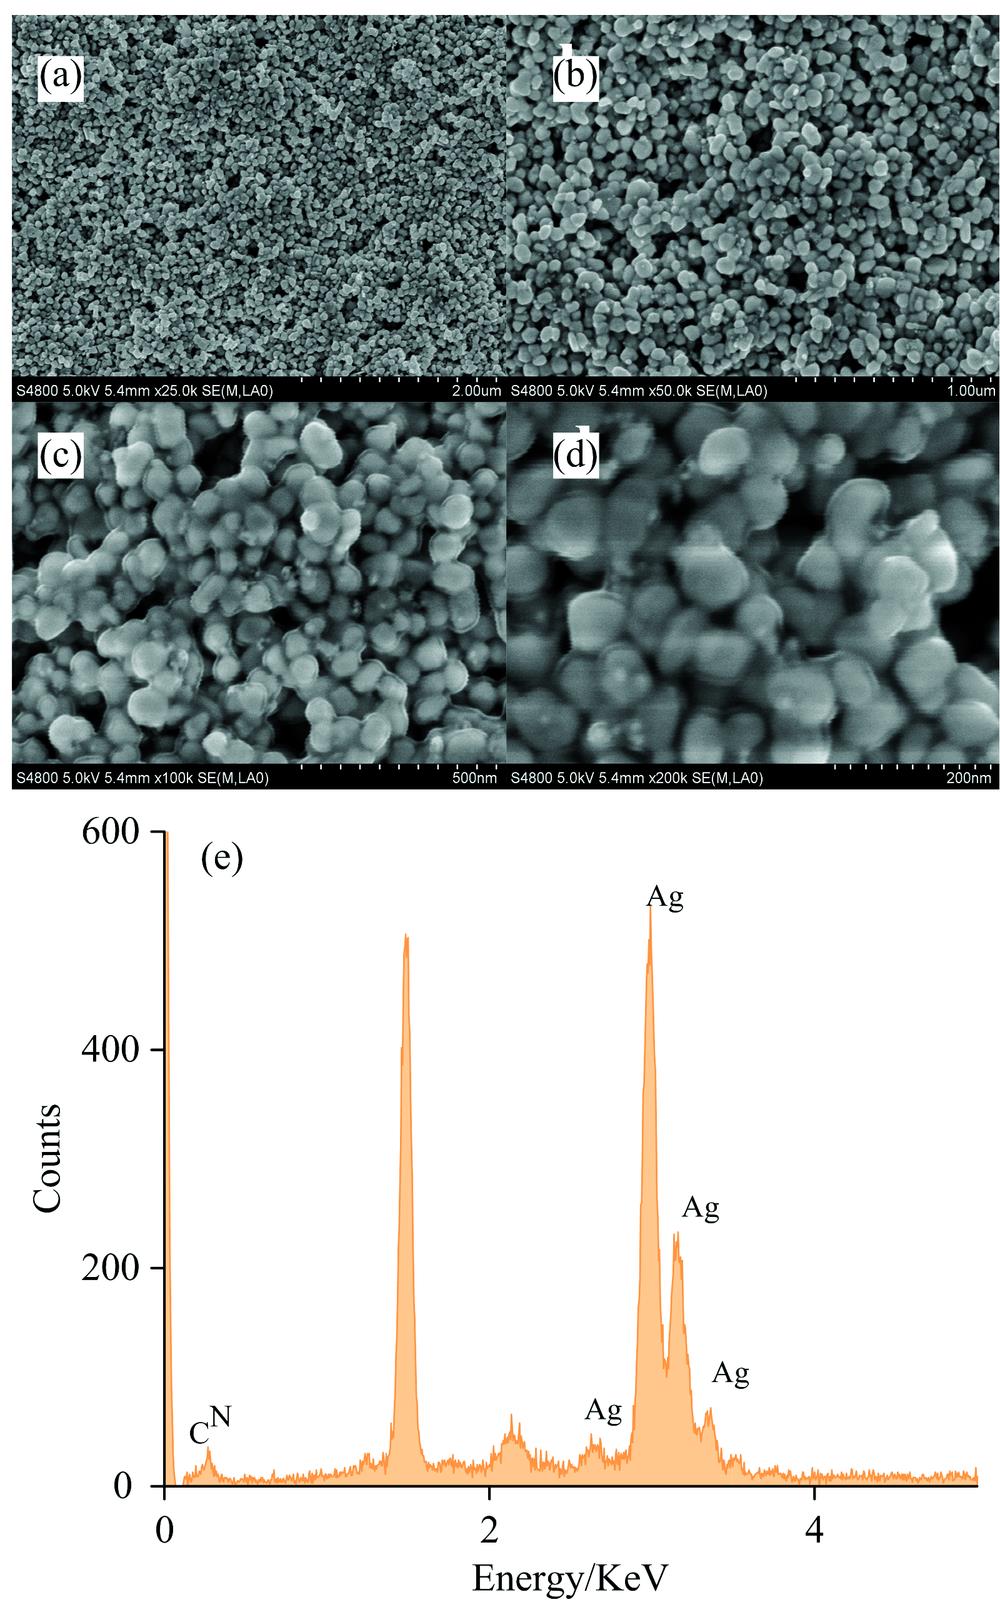 SEM image and EDS energy spectrum of Ag/PANI and Au/PANI nanocomposites with different magnification(a): 25×103; (b): 50×103; (c): 100×103; (d): 200×103;(e): EDS energy spectrum of Ag/PANI